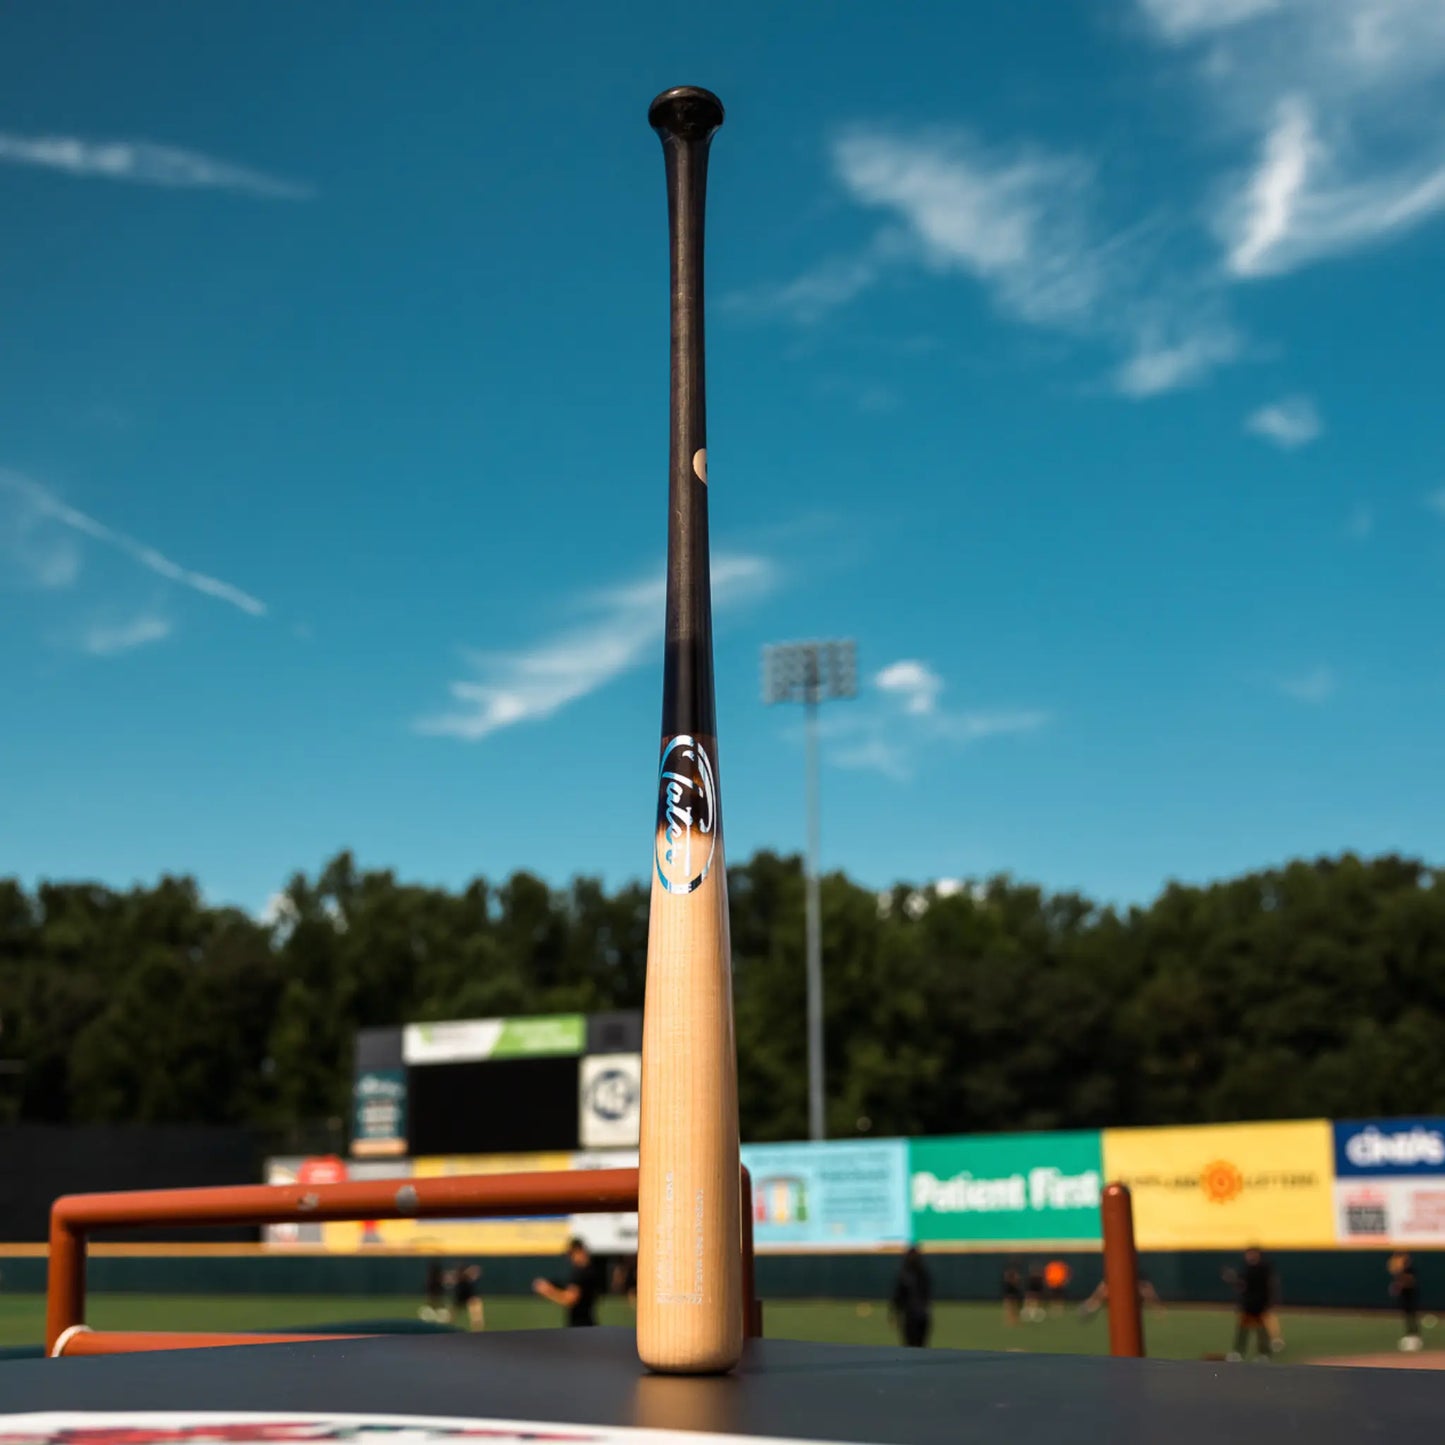 This image features a Tater X4 Pro Maple bat standing upright on the edge of a baseball field. The bat's handle points skyward while the backdrop captures the stadium seating and clear blue sky, indicating its popularity in tournaments and showcases as a Victus wood bat alternative.